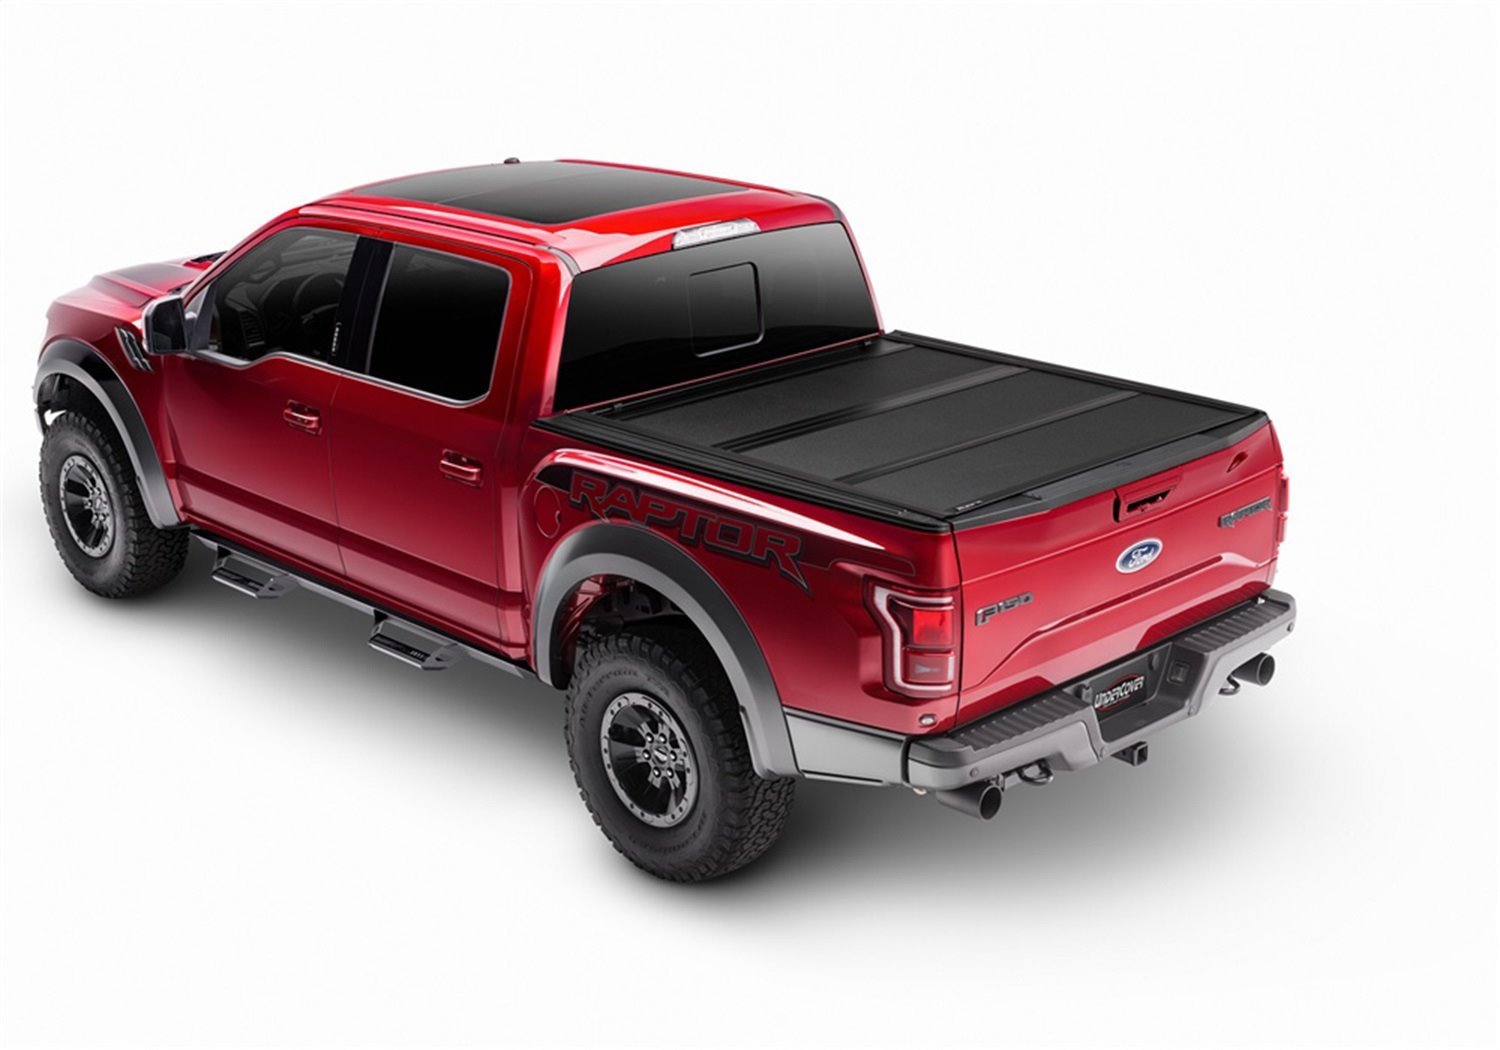 AX52020 Armor Flex Hard Folding Cover, Fits Select Nissan Frontier 5'Bed w/ or w/o Utili-Track System, Black Textured